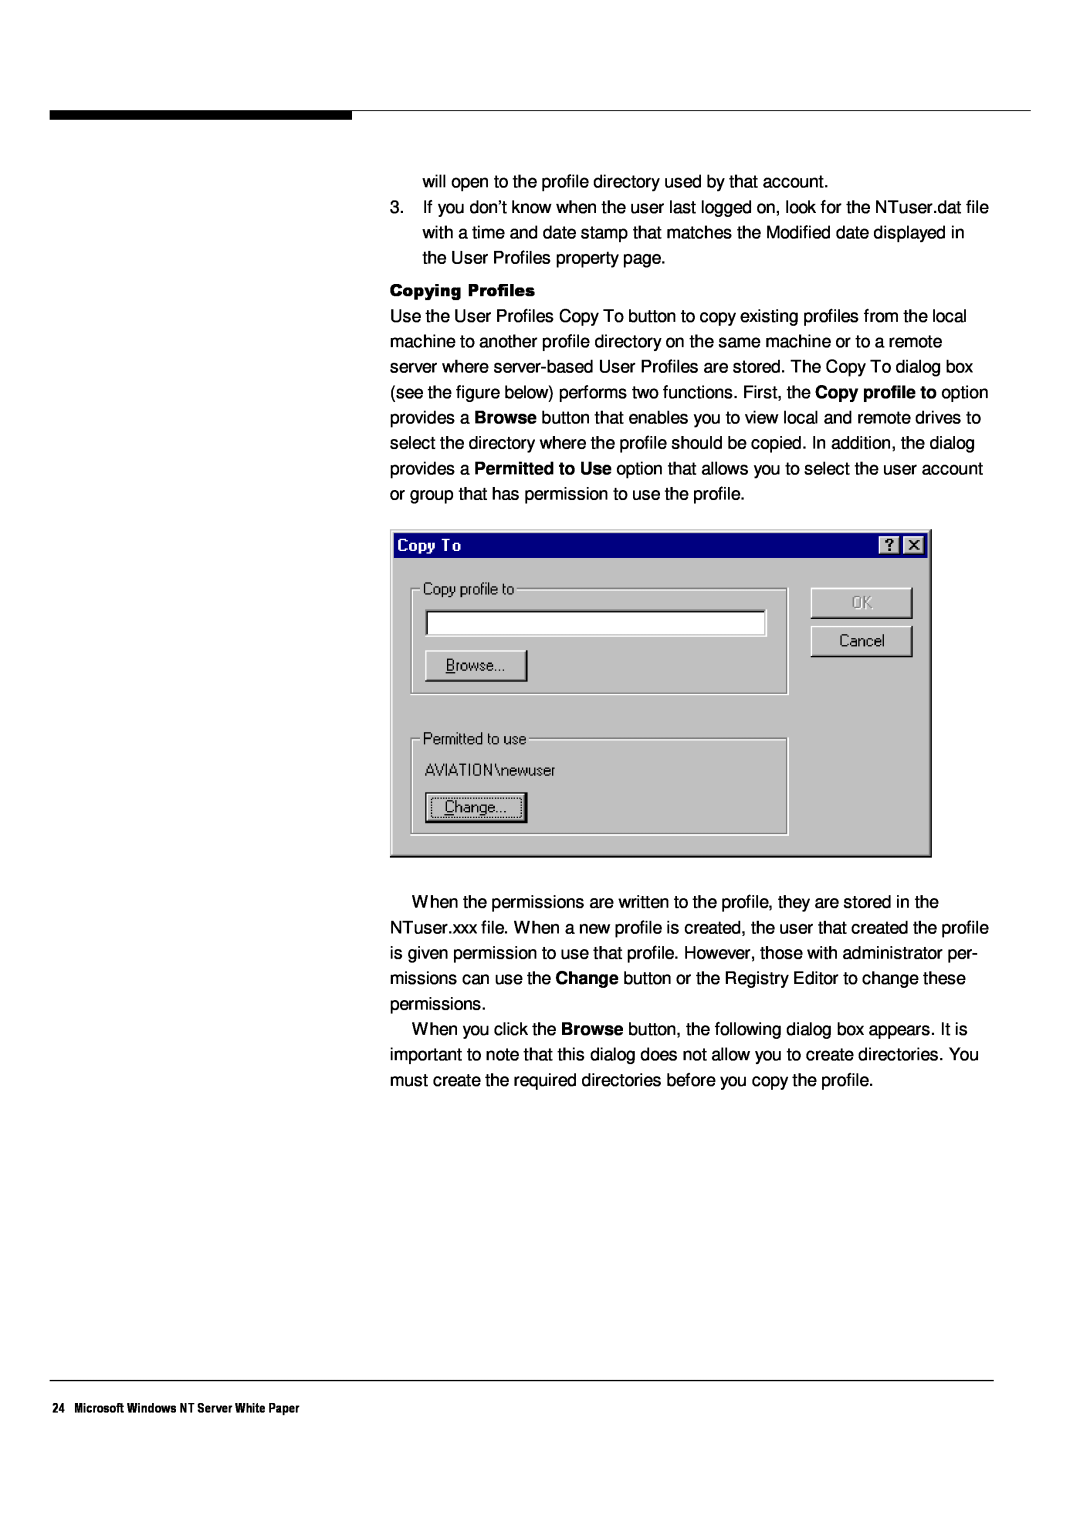 Microsoft Windows NT 4.0 manual will open to the profile directory used by that account 